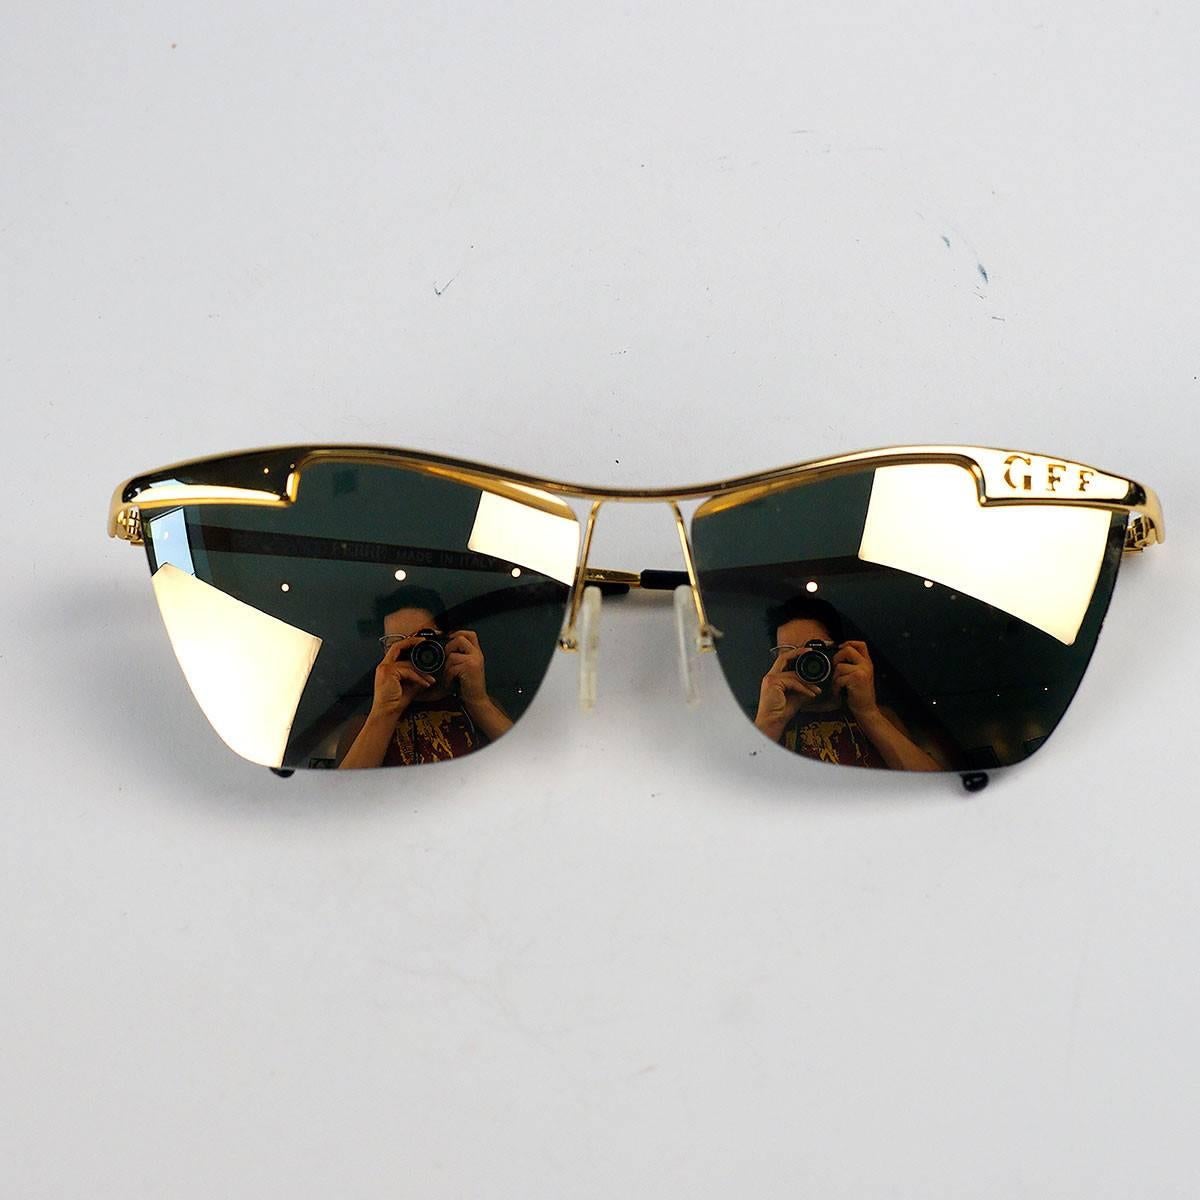 Gianfranco Ferre gold mirror cat eye sunglasses. 

Made In Italy. GFF 56/S 001

Measurements:
Lens-2 inches wide, 1.5 inches high
Arm- 4.5 inches 
Frame- 5 inches 
Bridge- 4 cm

Good Vintage Condition:Please remember all clothes are previously owned